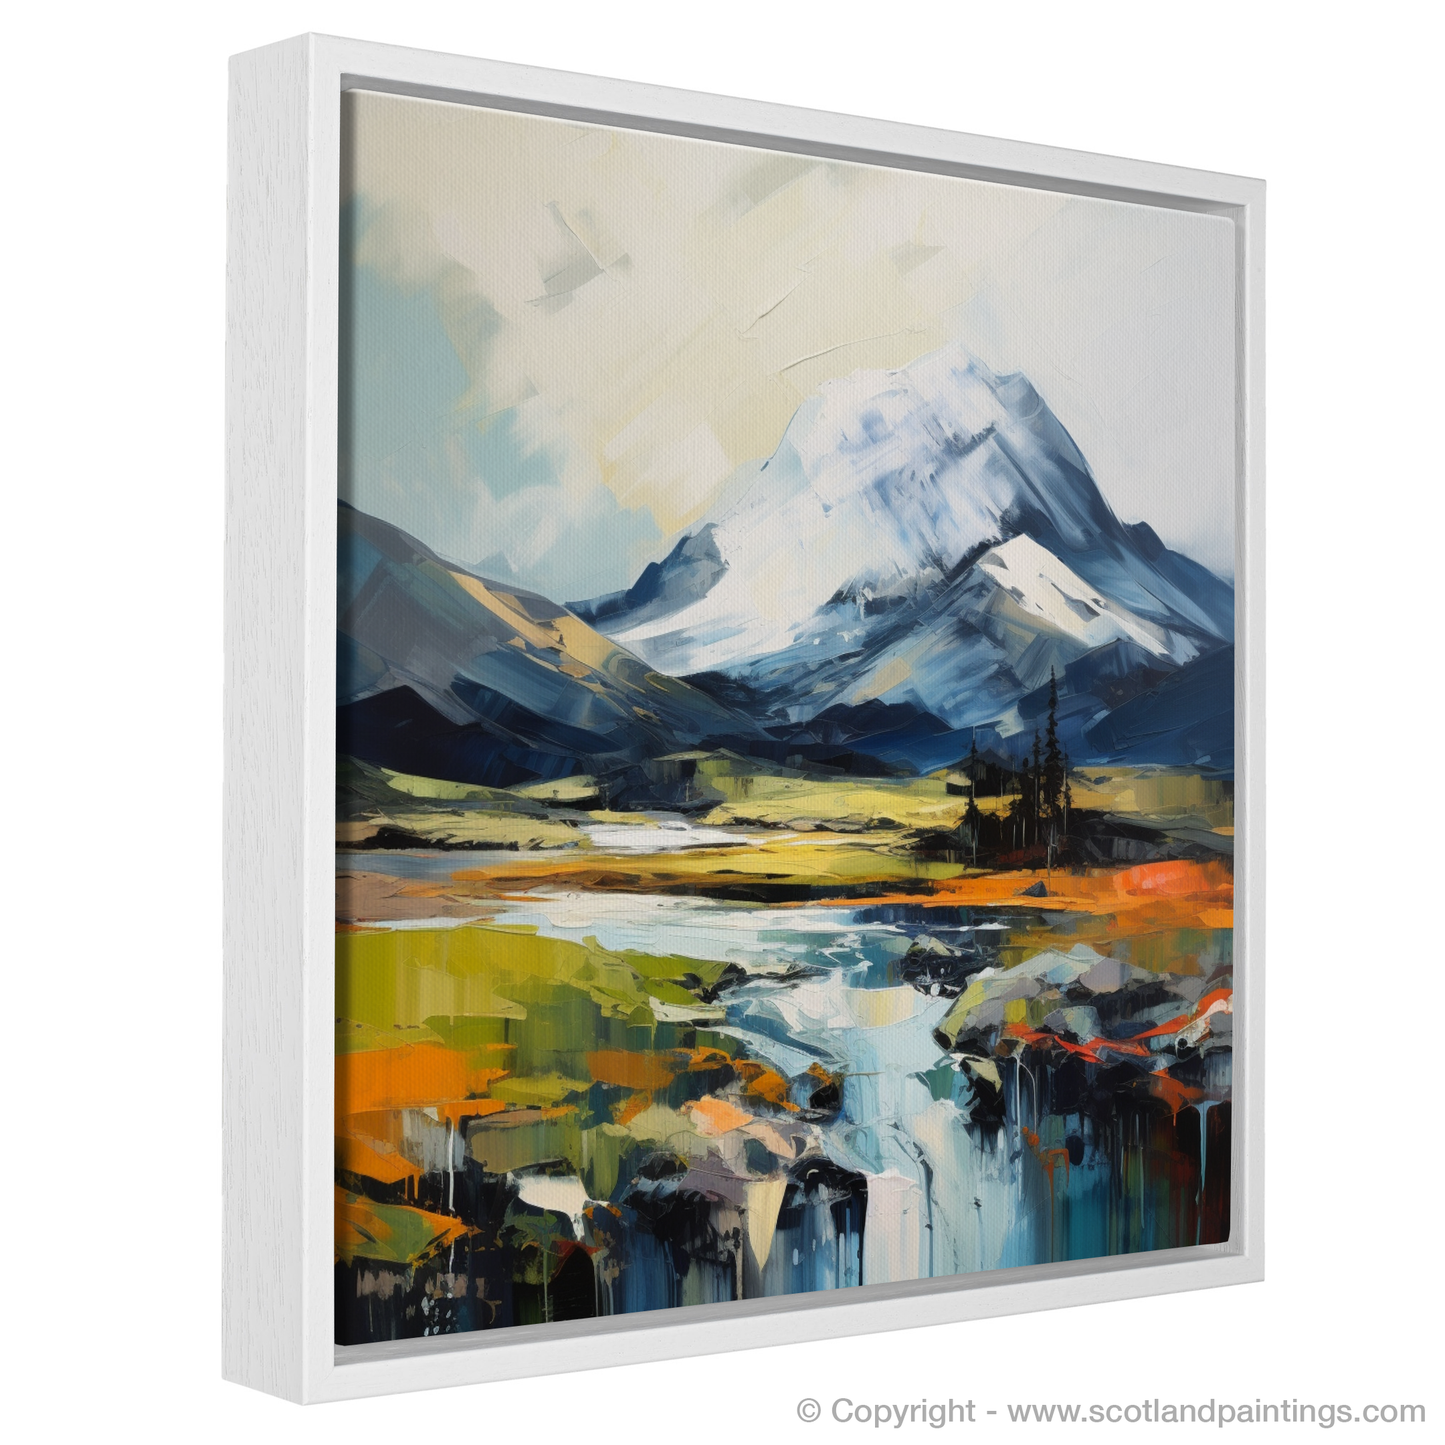 Painting and Art Print of Ben More entitled "Majestic Ben More: An Expressionist Ode to Scotland's Wild Highlands".